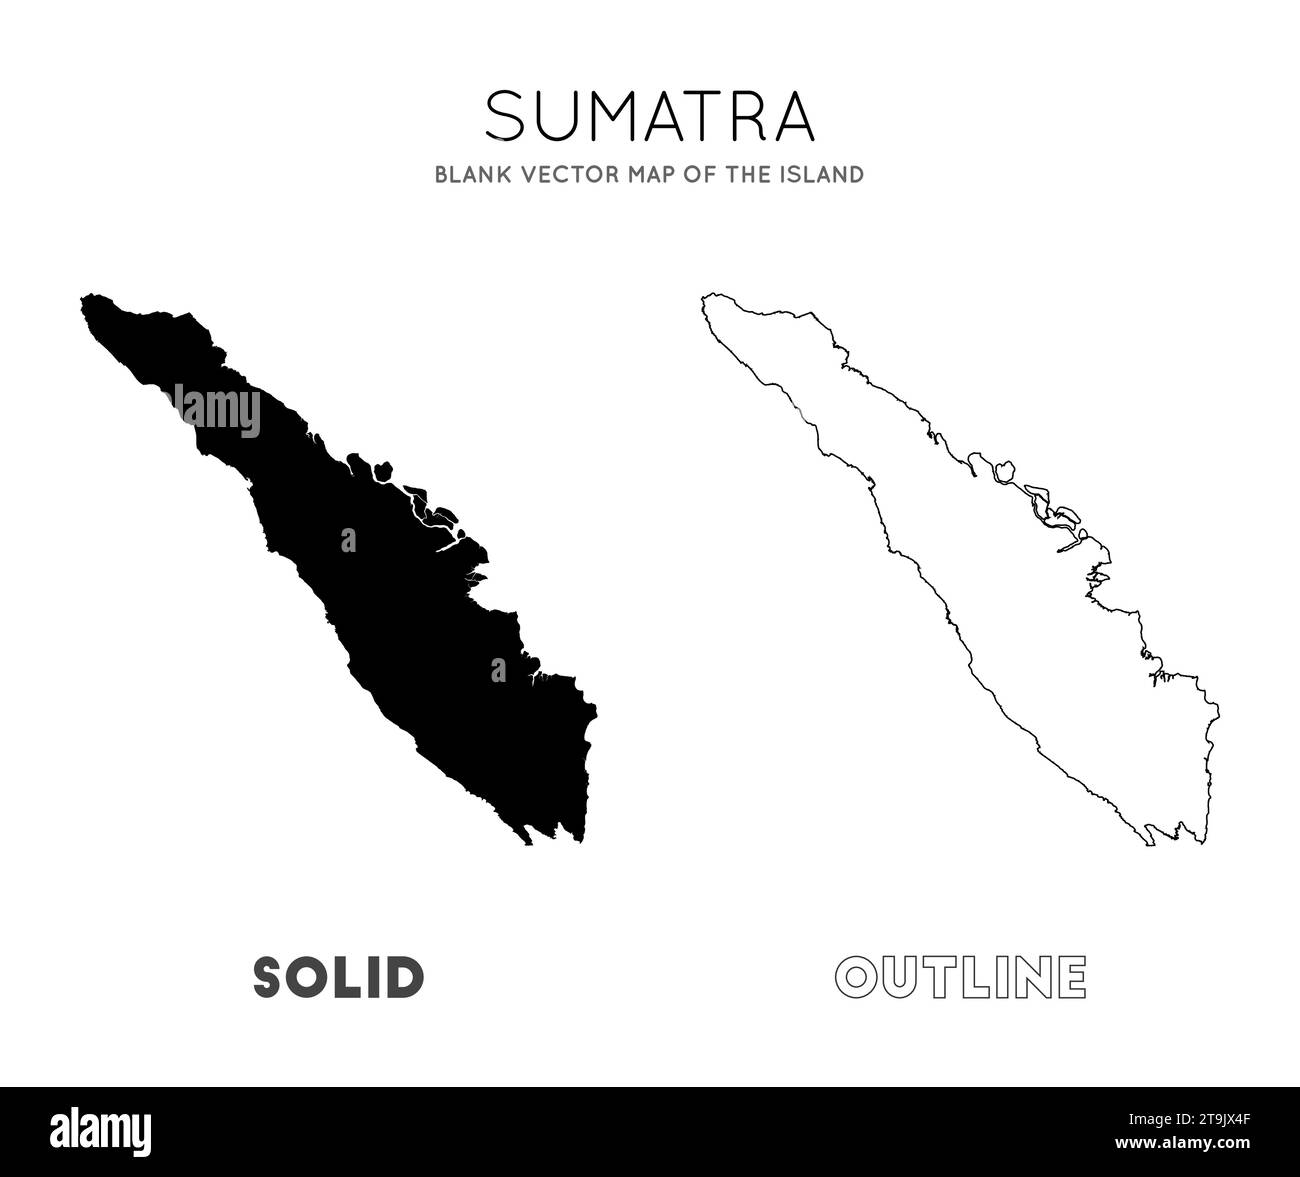 Sumatra map. Blank vector map of the Island. Borders of Sumatra for your infographic. Vector illustration. Stock Vector